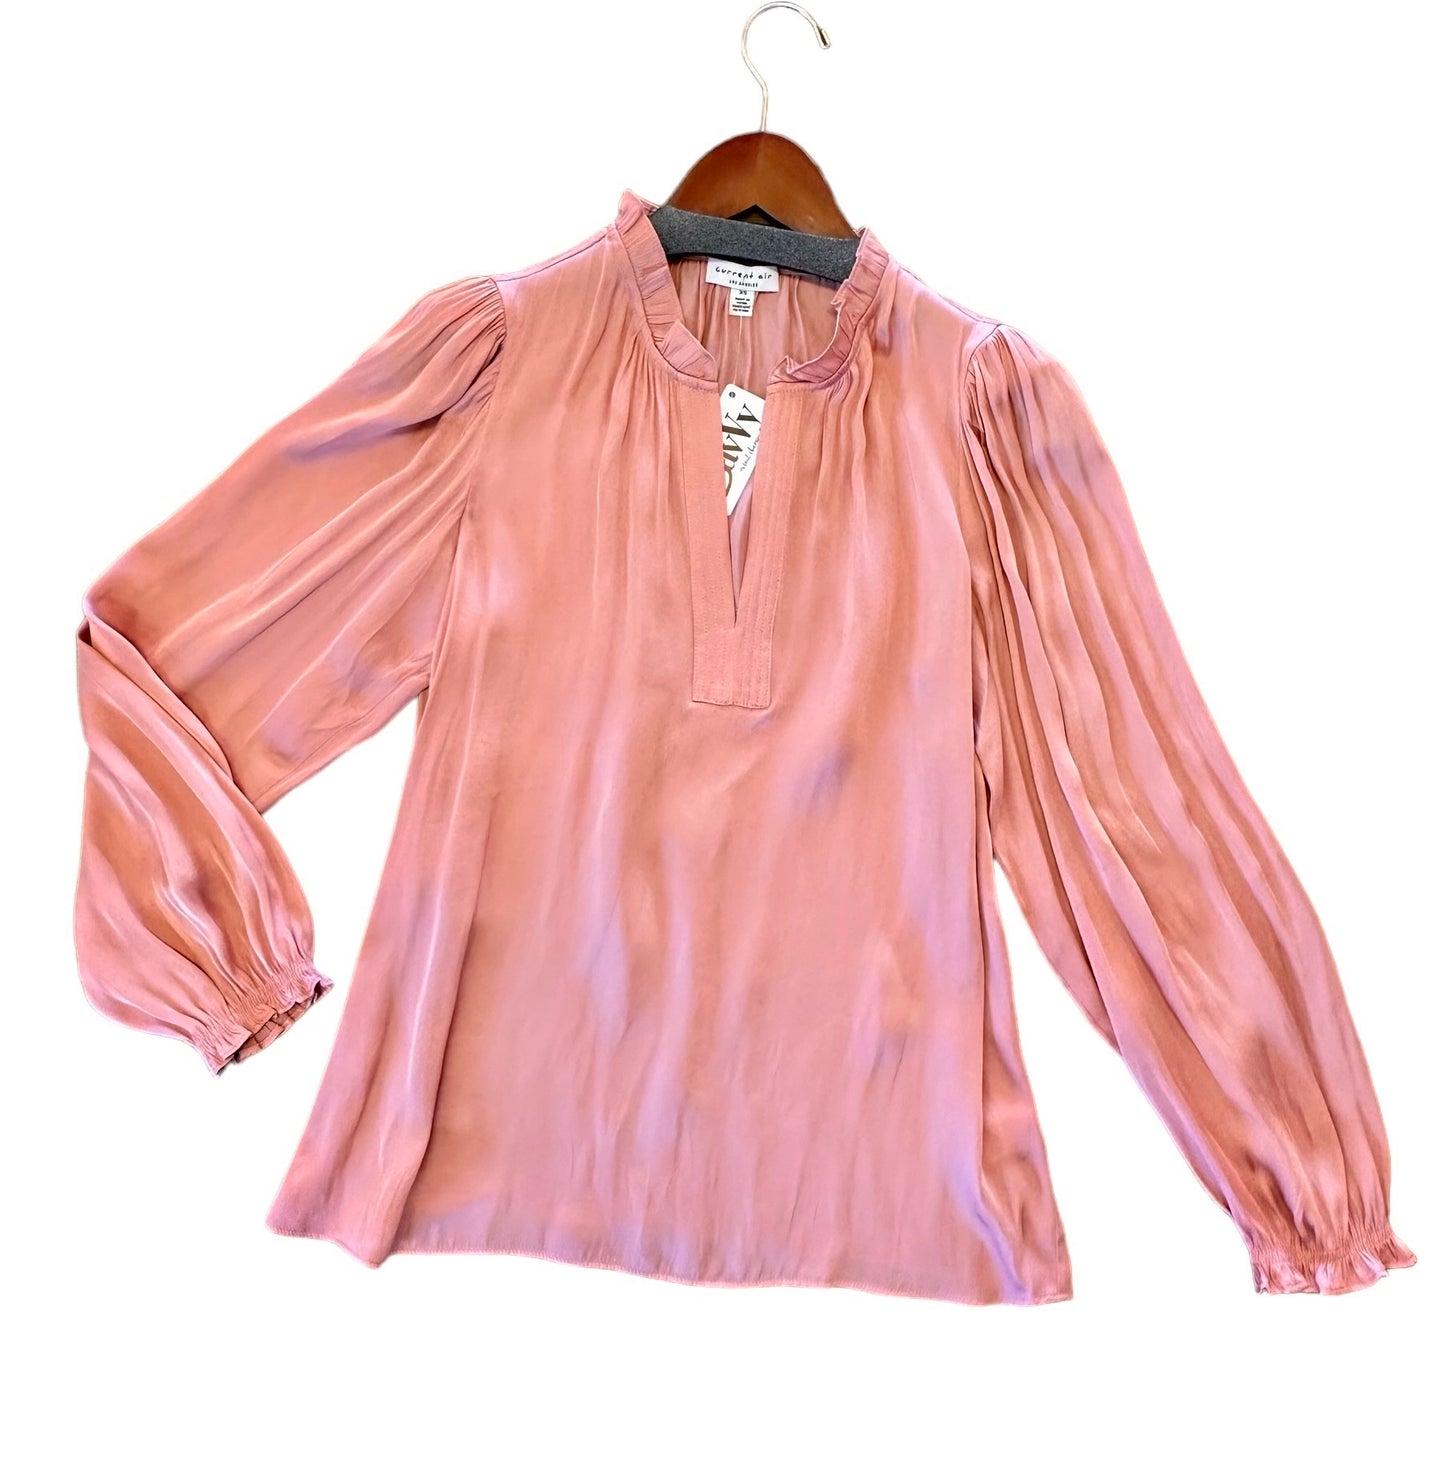 Long Sleeve Ruffled Split Neck Blouse in dusty blush by Current Air